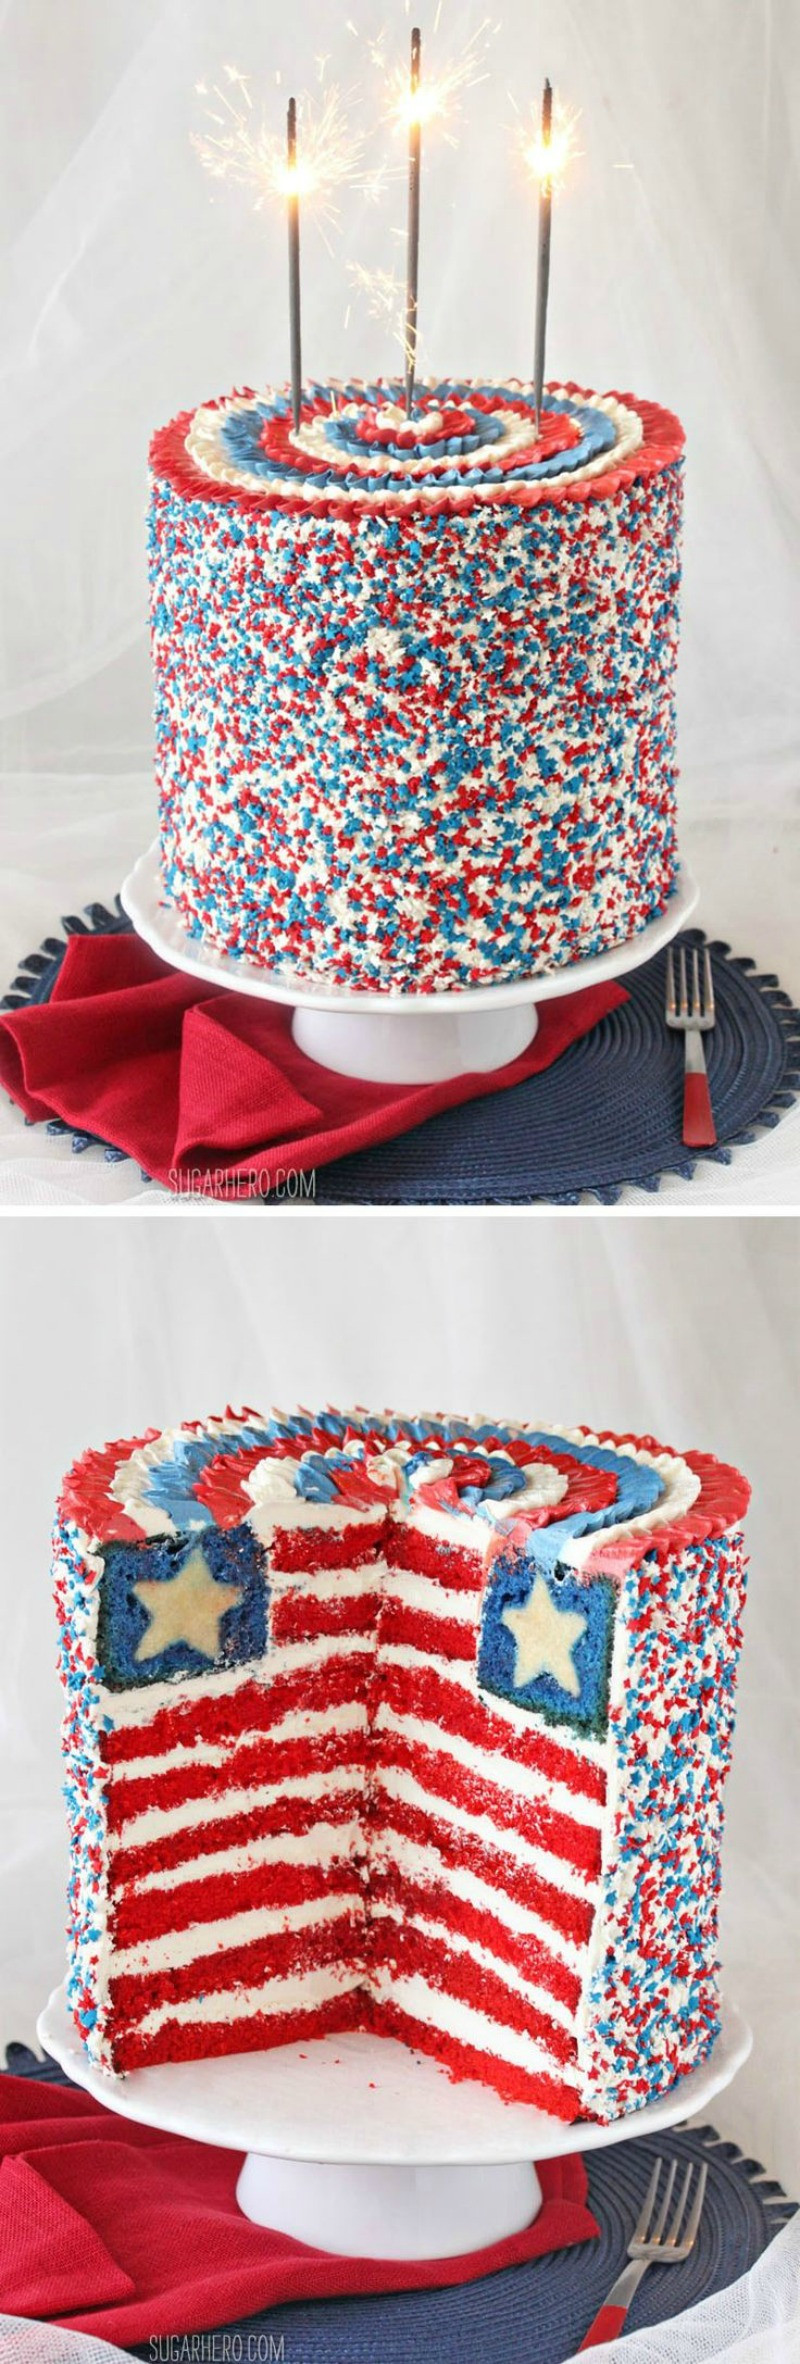 4th Of July Cake Ideas
 11 Genius 4th of July Cakes